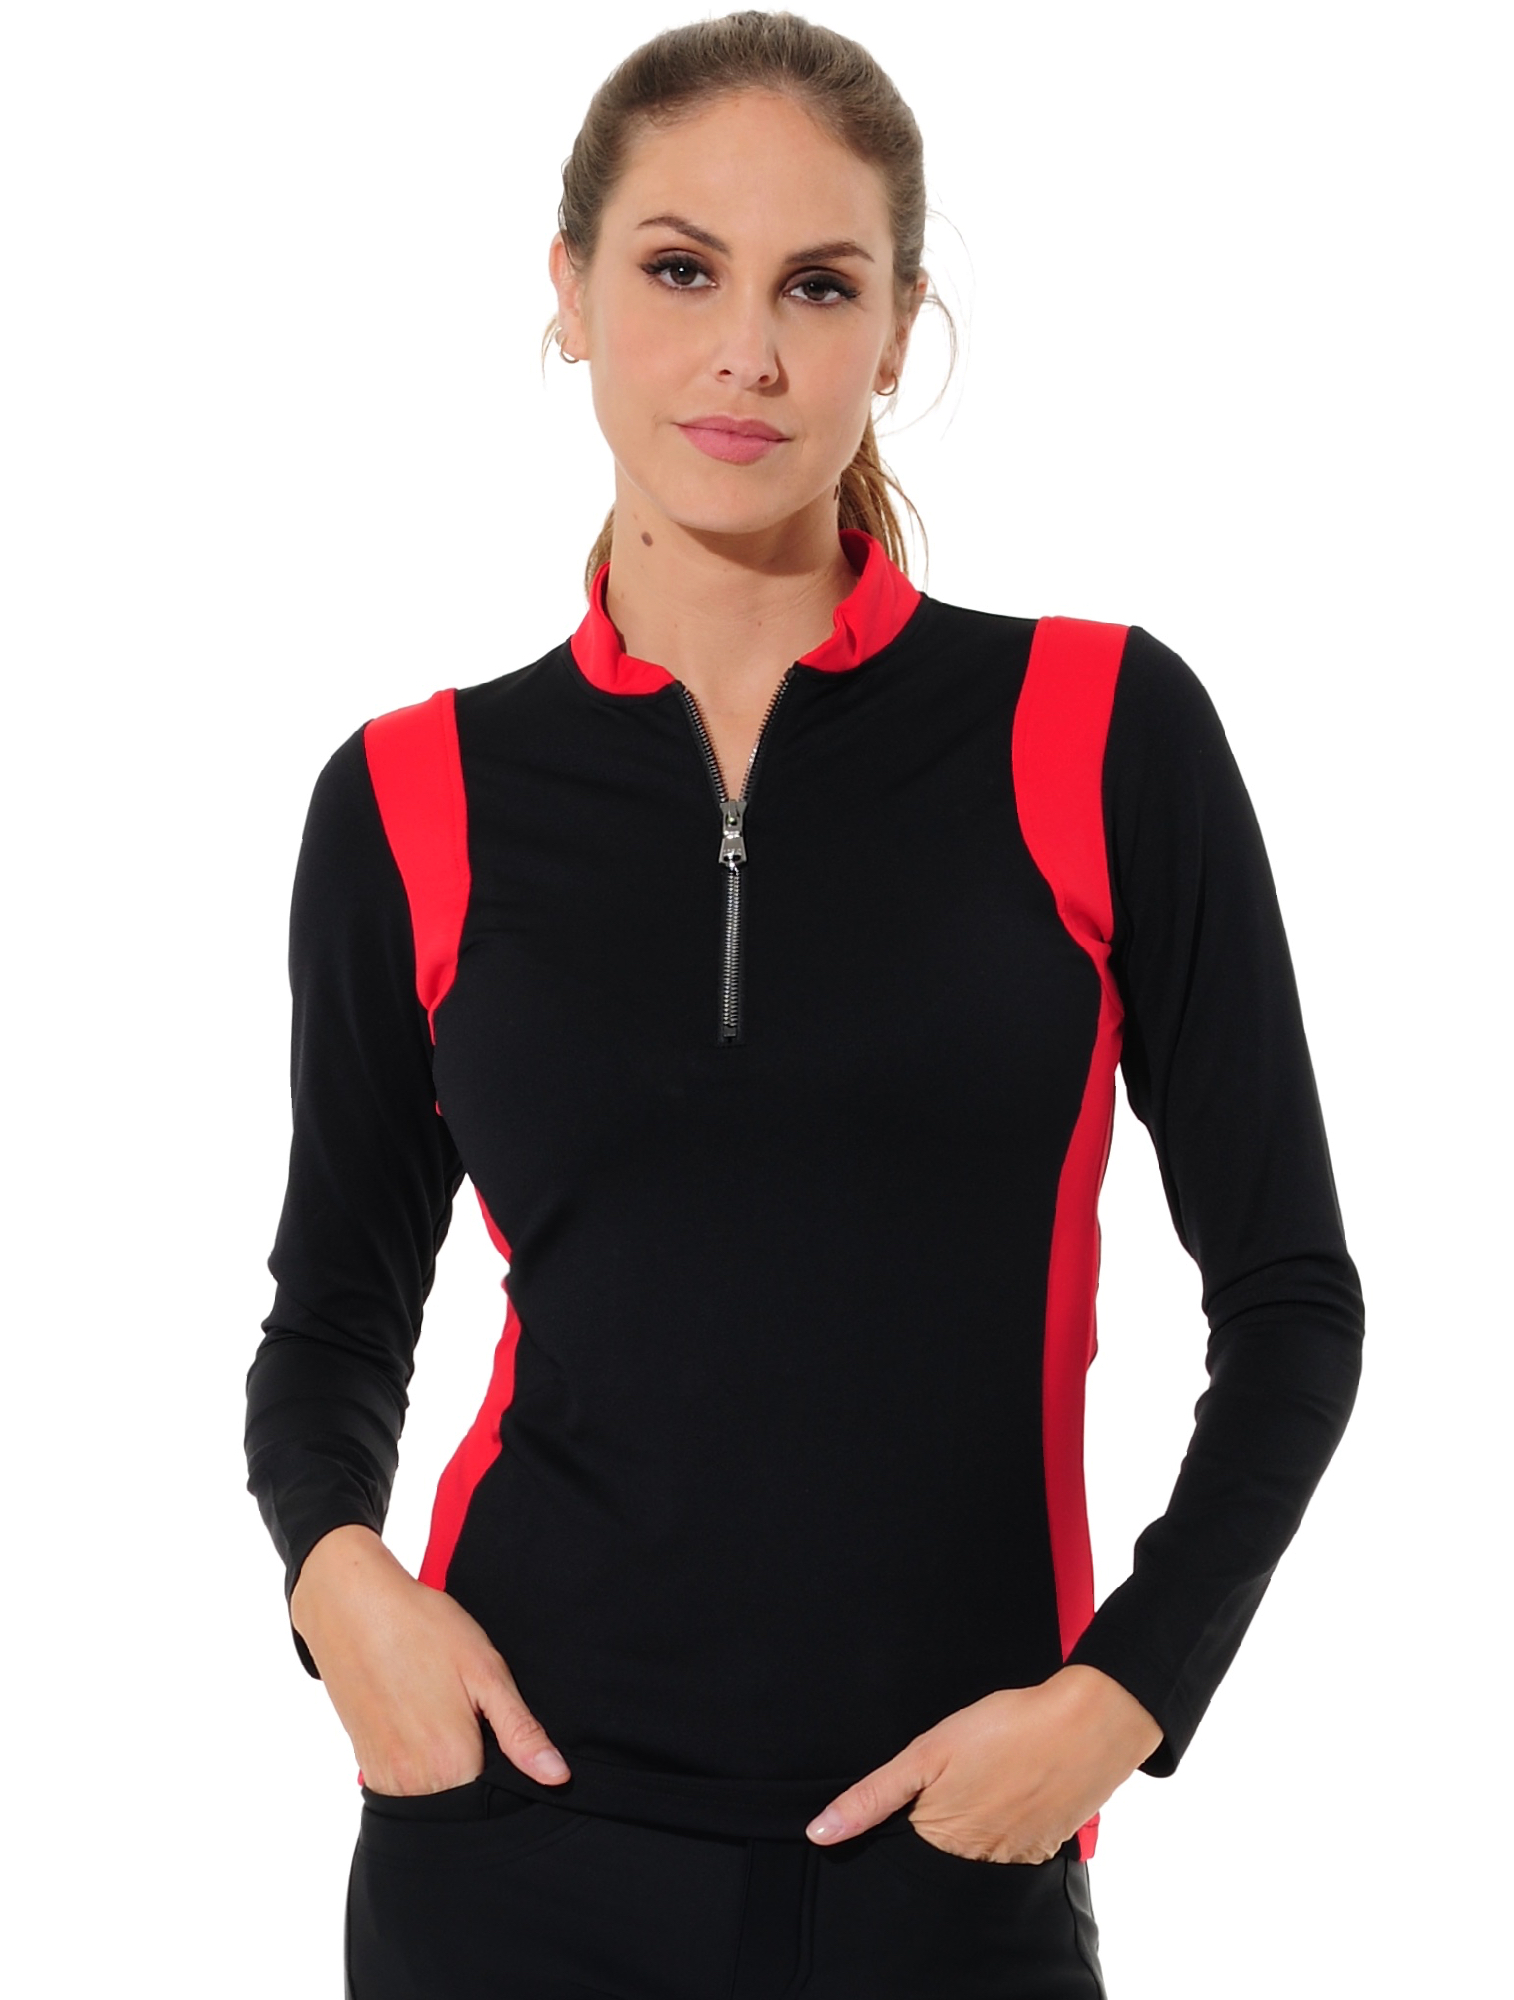 Jersey zip polo shirt black/red 